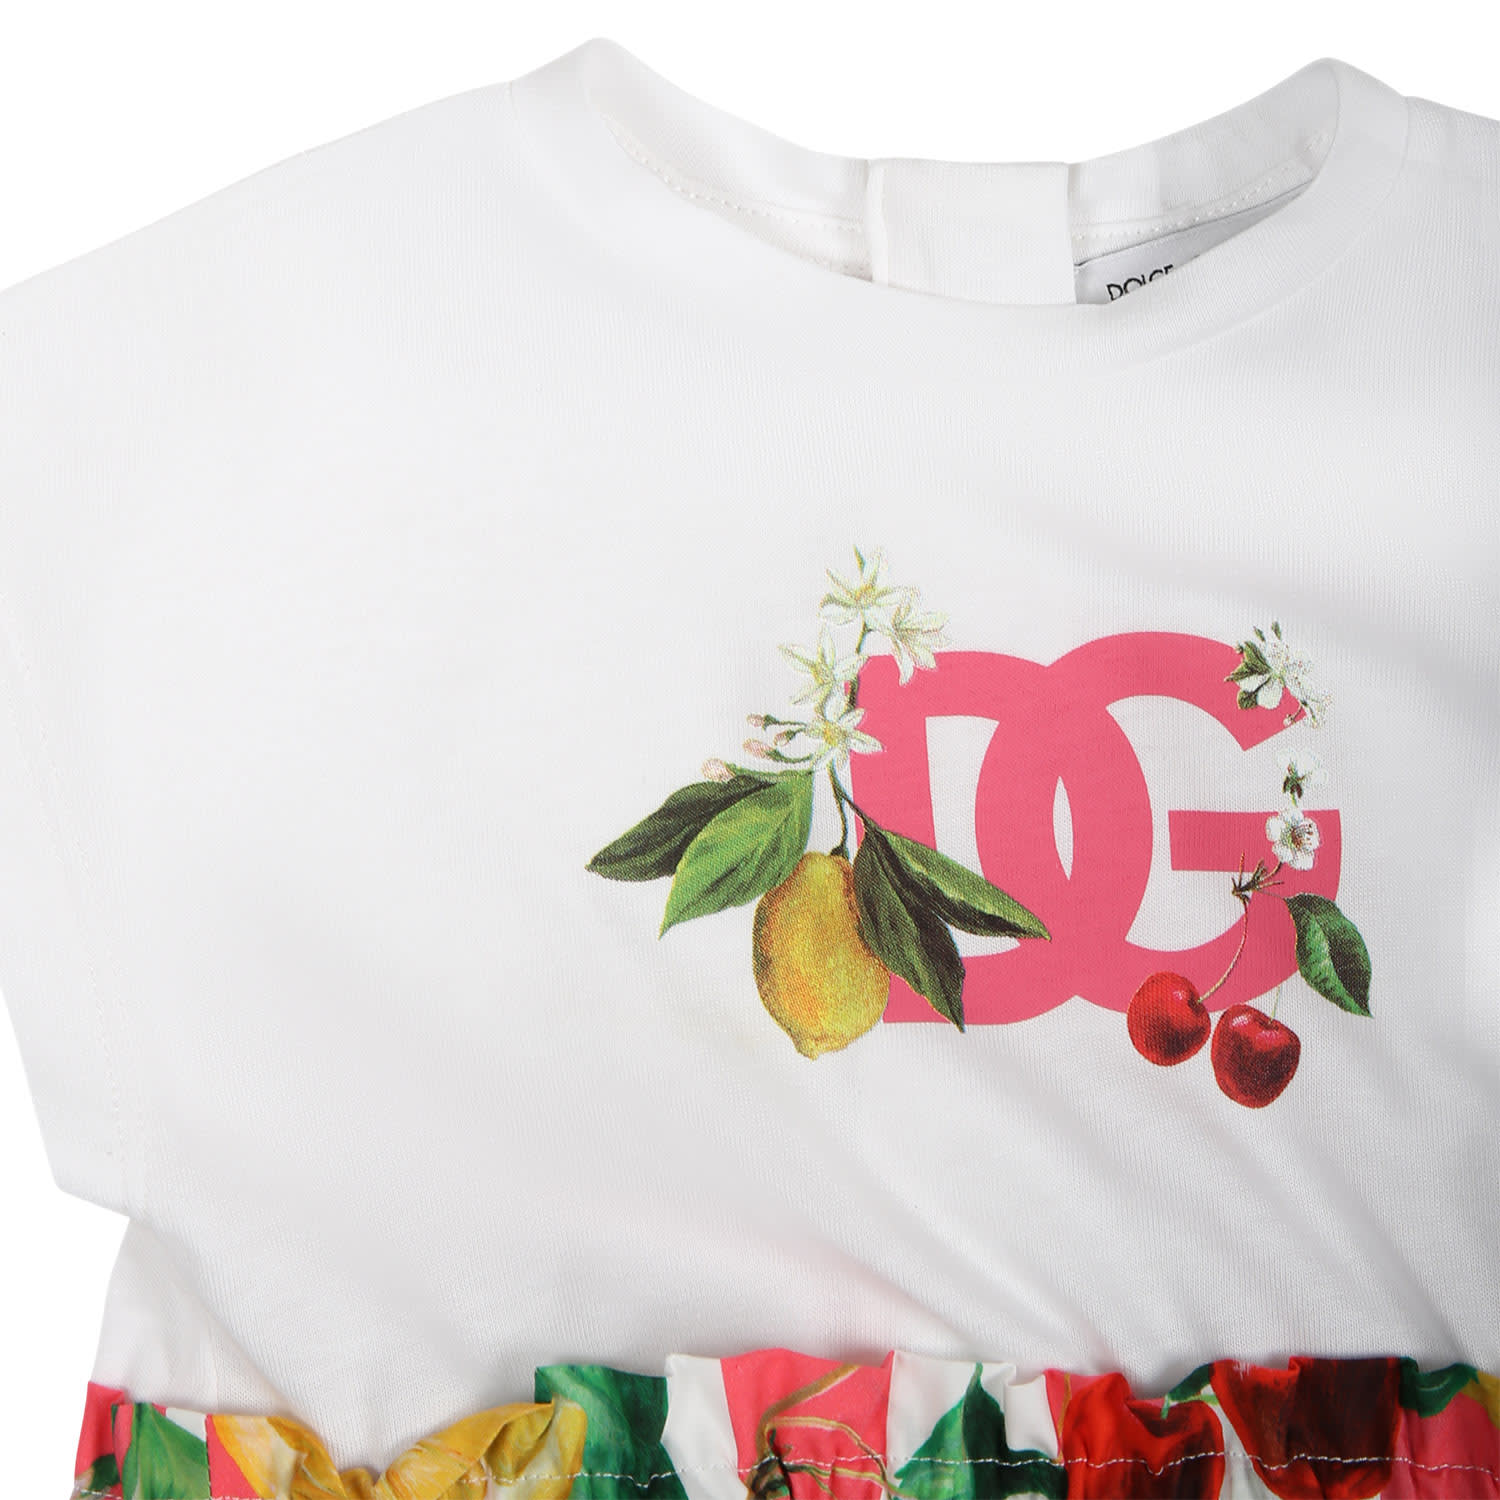 Shop Dolce & Gabbana White Dress For Baby Girl With All-over Multicolor Fruits And Flowers